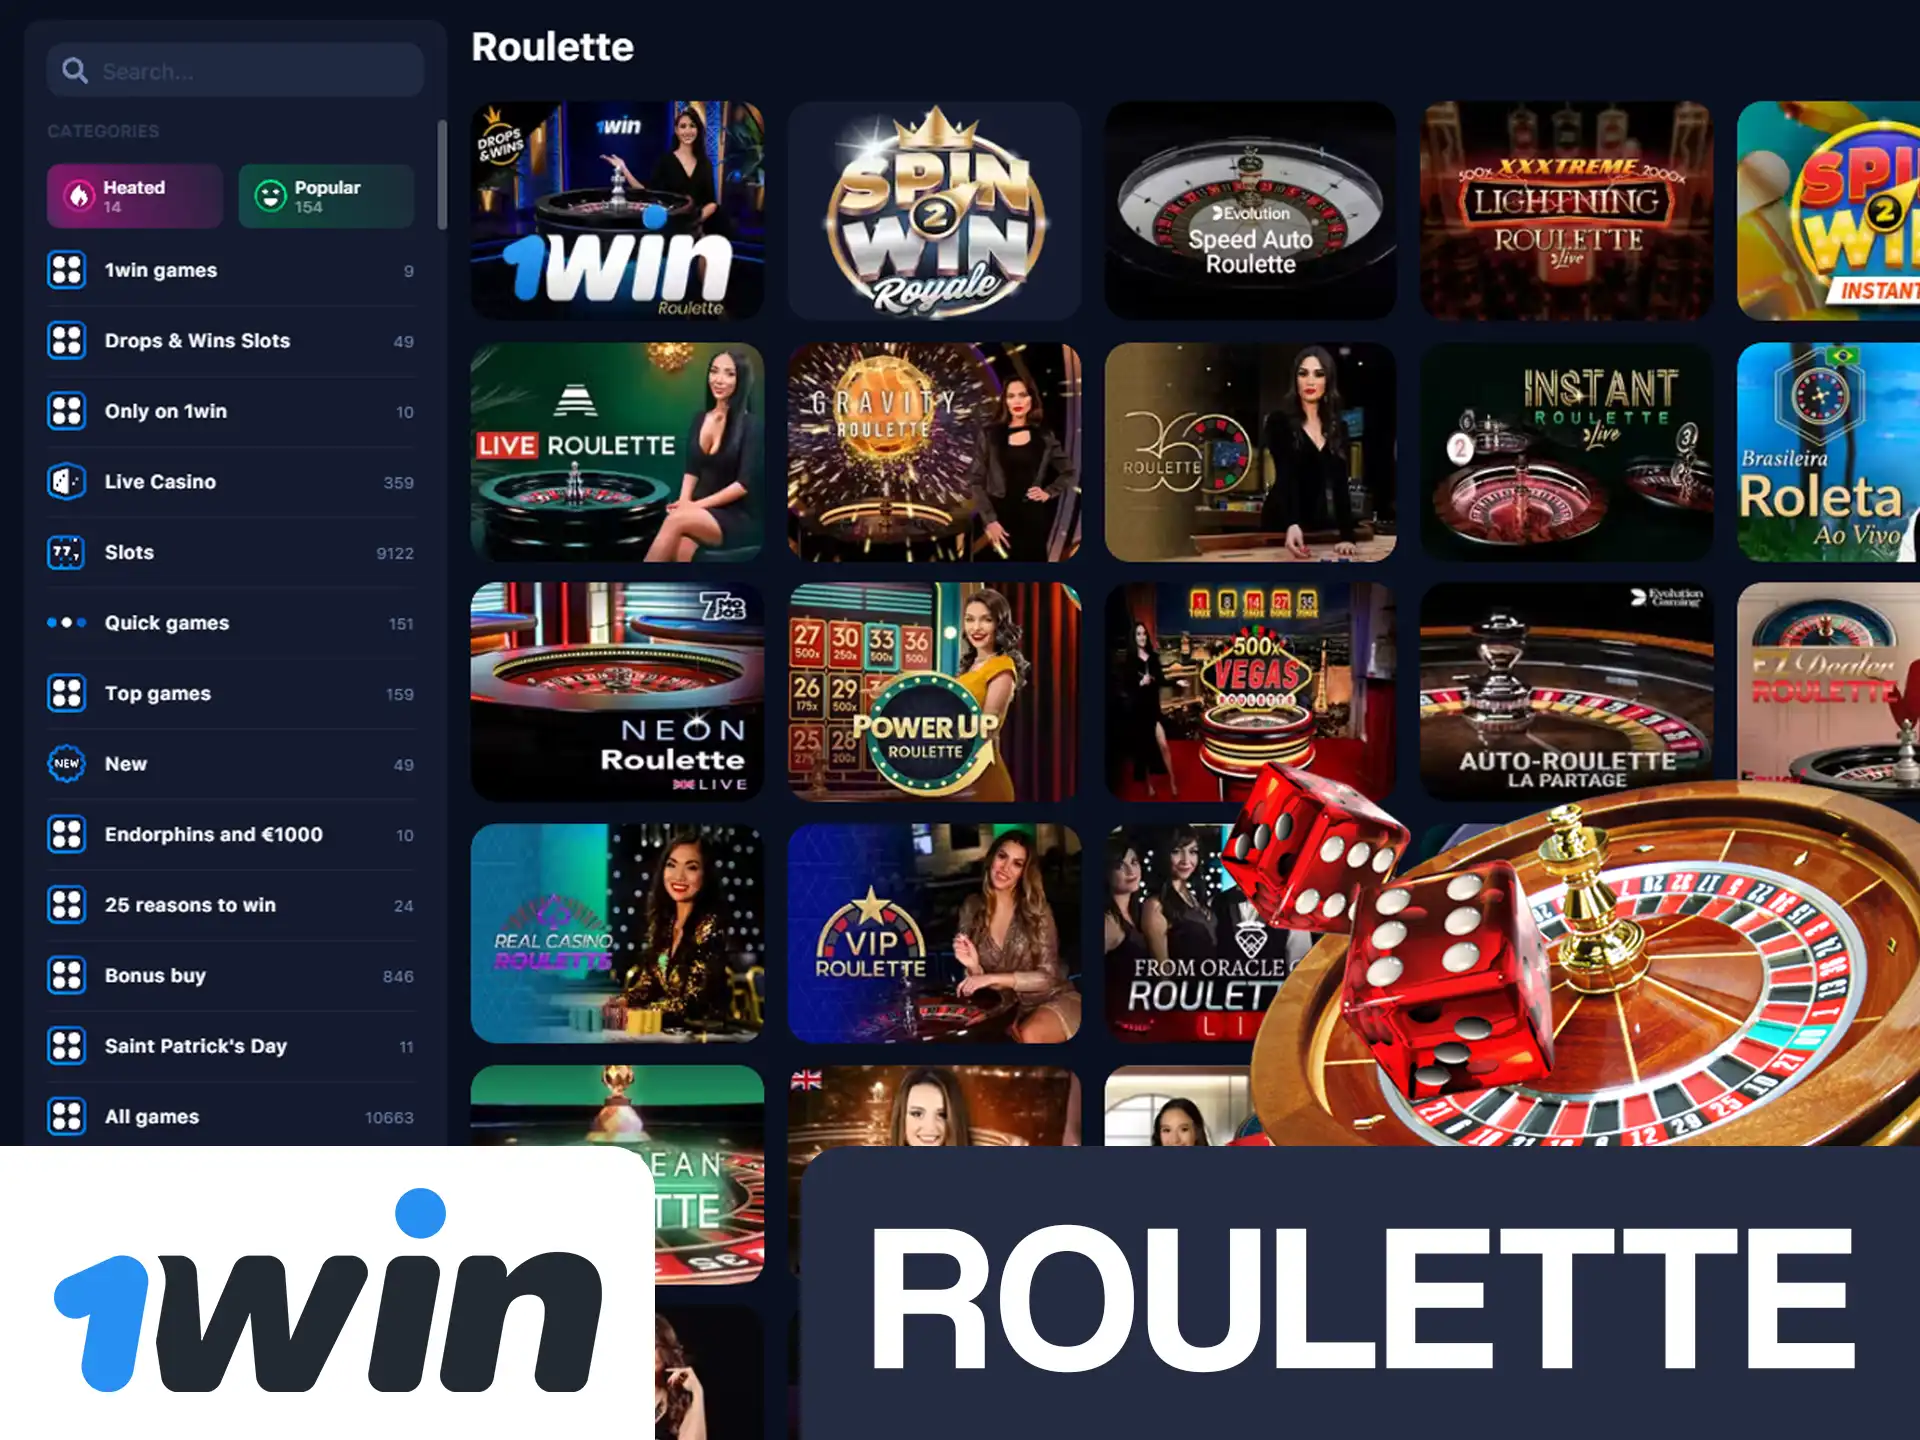 Spin roulette for big winnings at 1win.